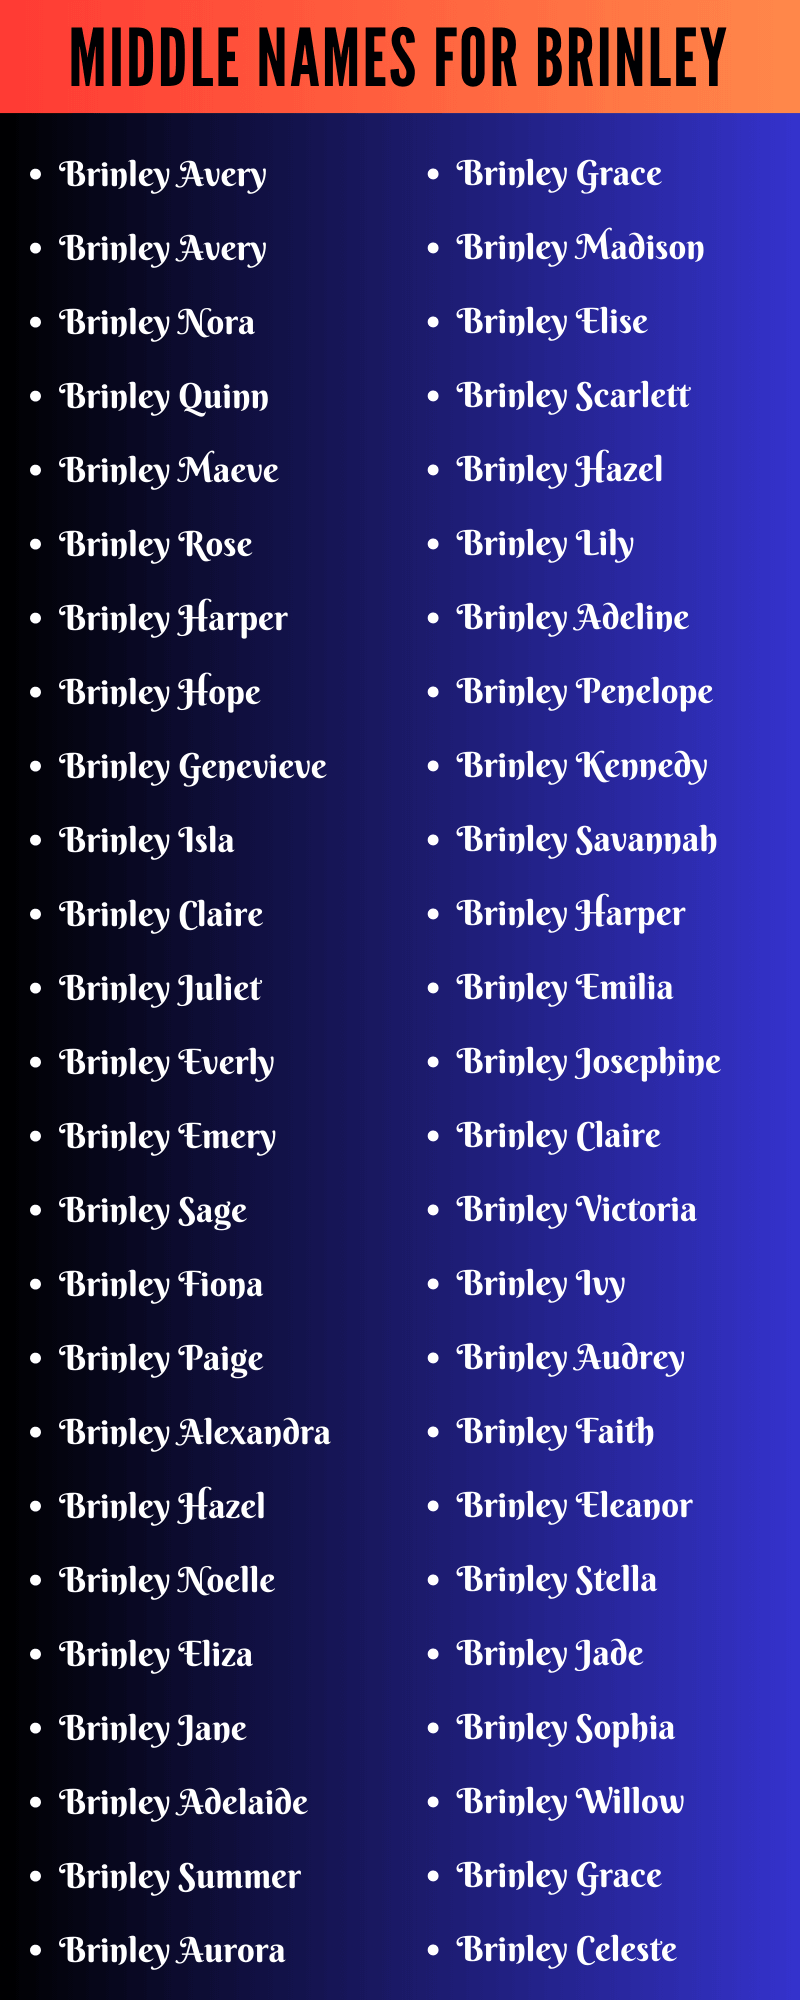 Middle Names For Brinley